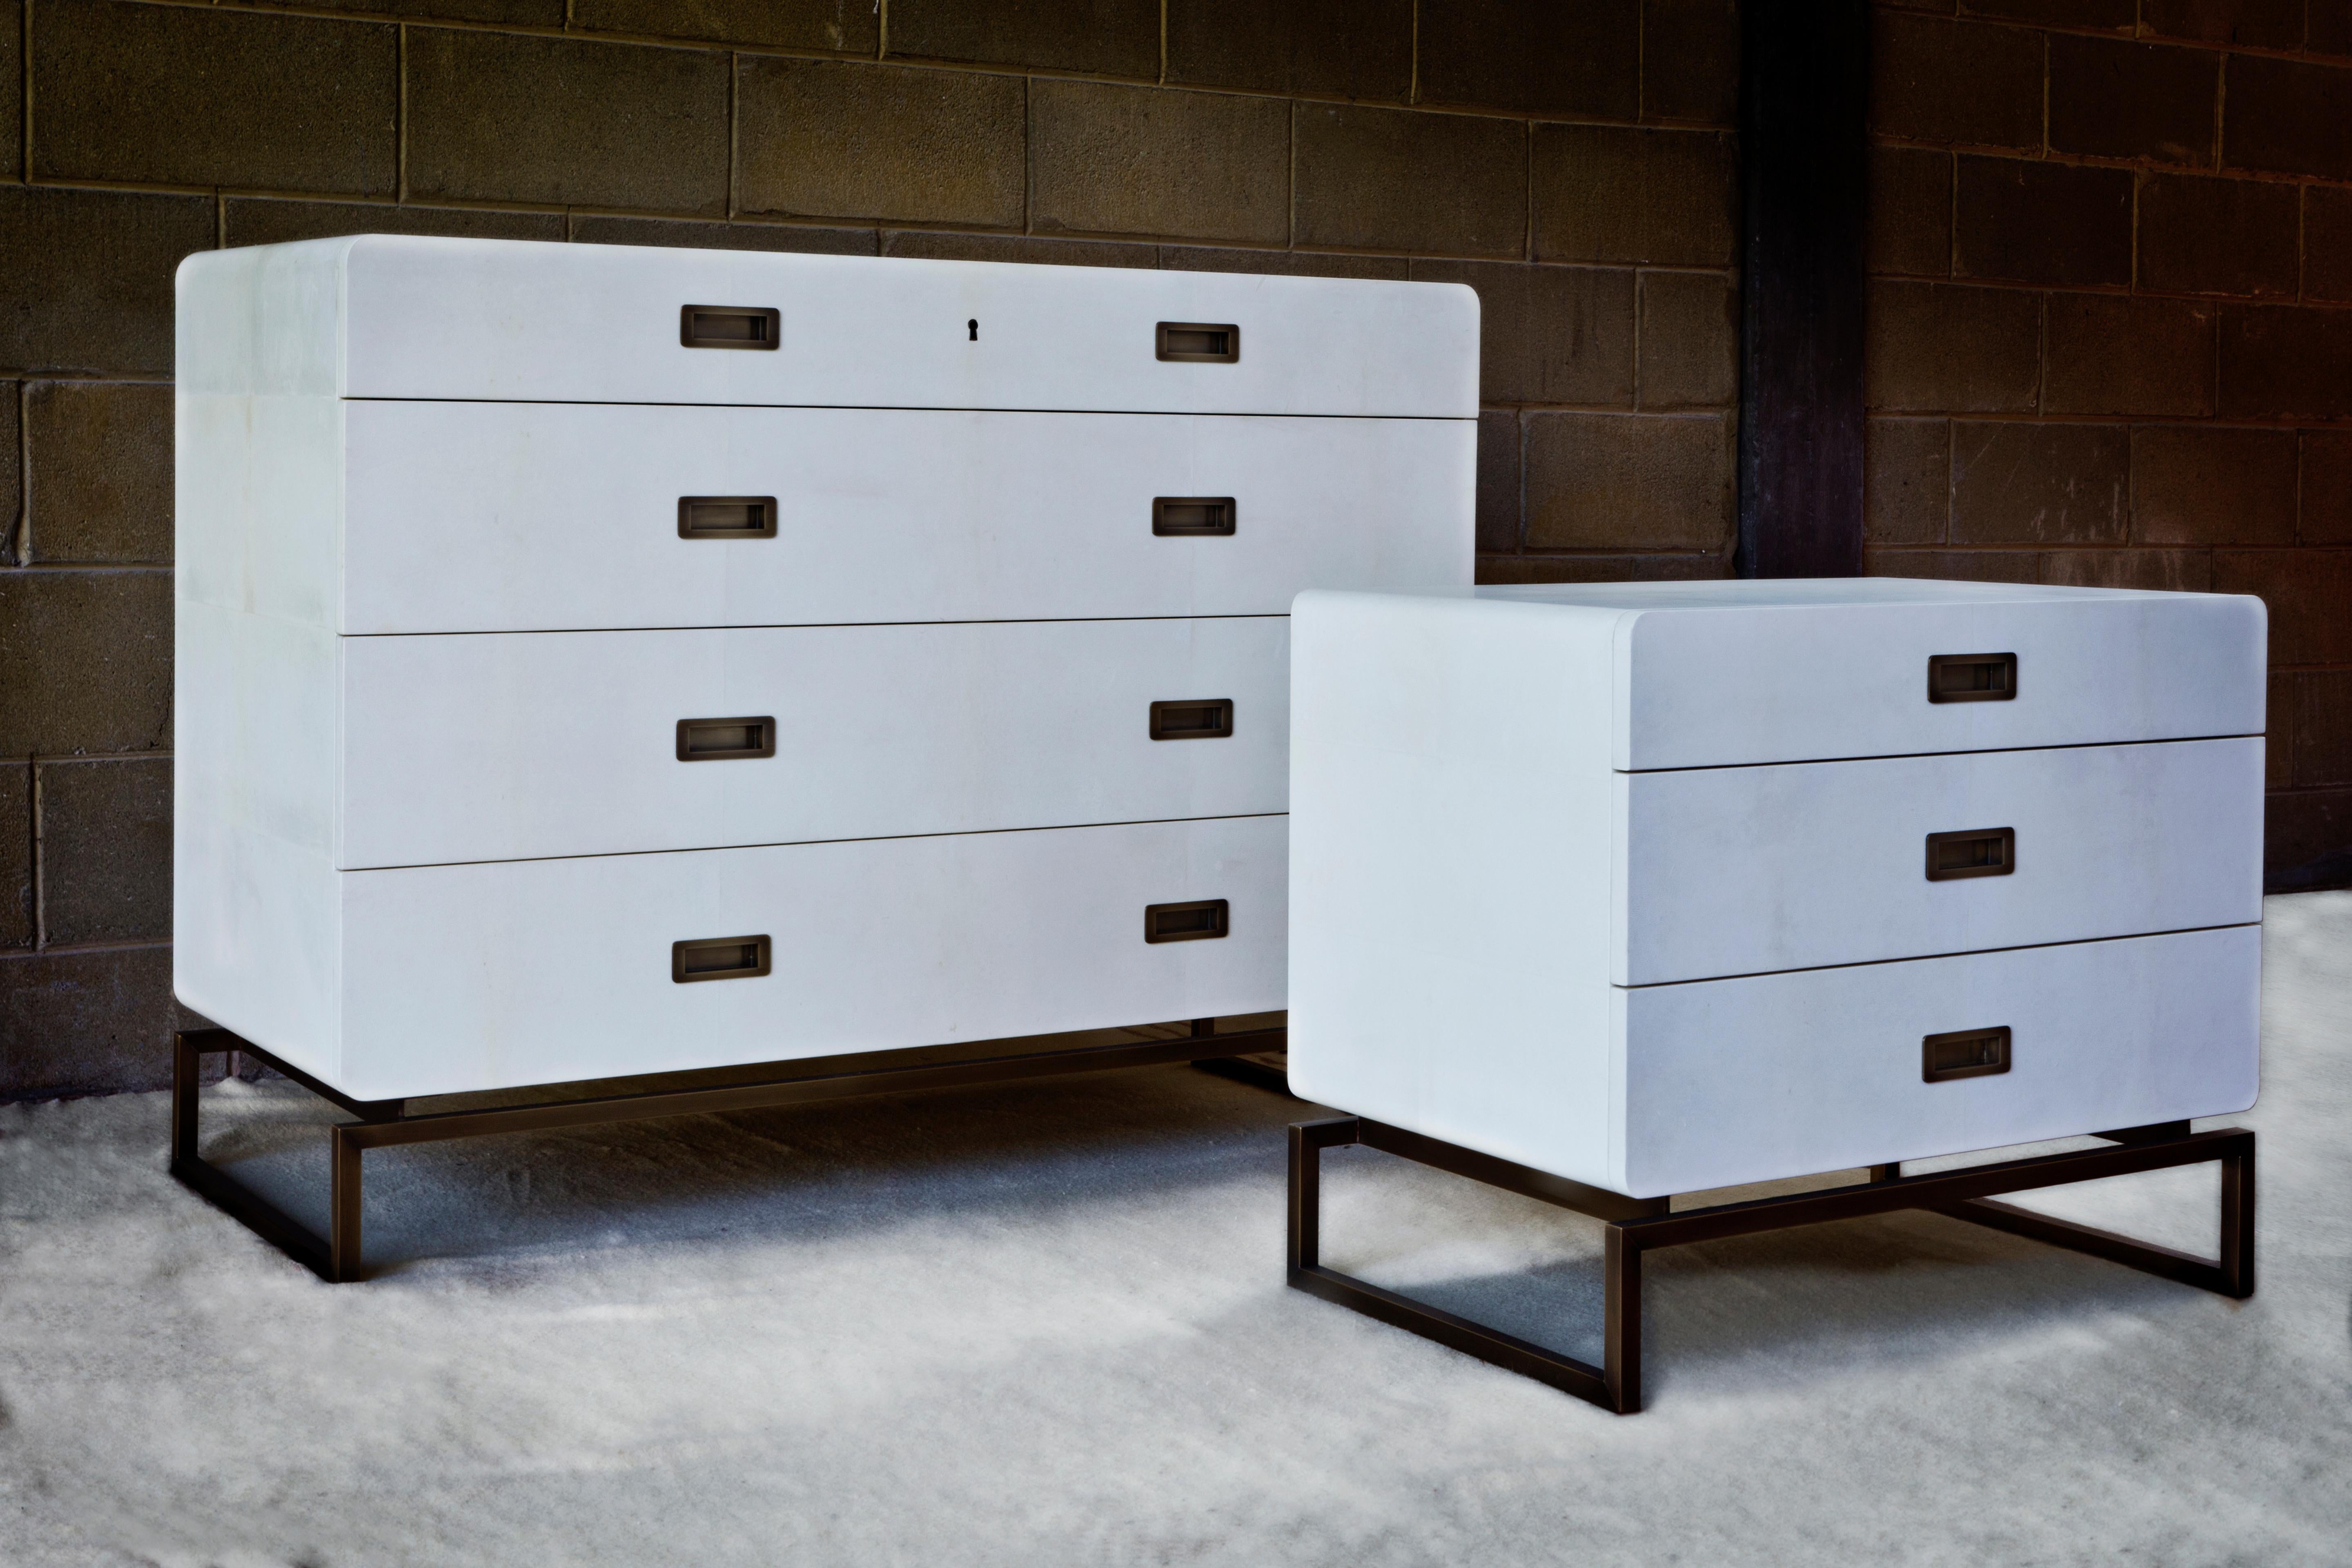 A set made up of a chest of drawers and a bedside cabinet inspired by travel trunks. The drawer element has clearly rounded corners and compact proportions, and rests on a structure of metal runners in bronze finish.

The clean lines and the